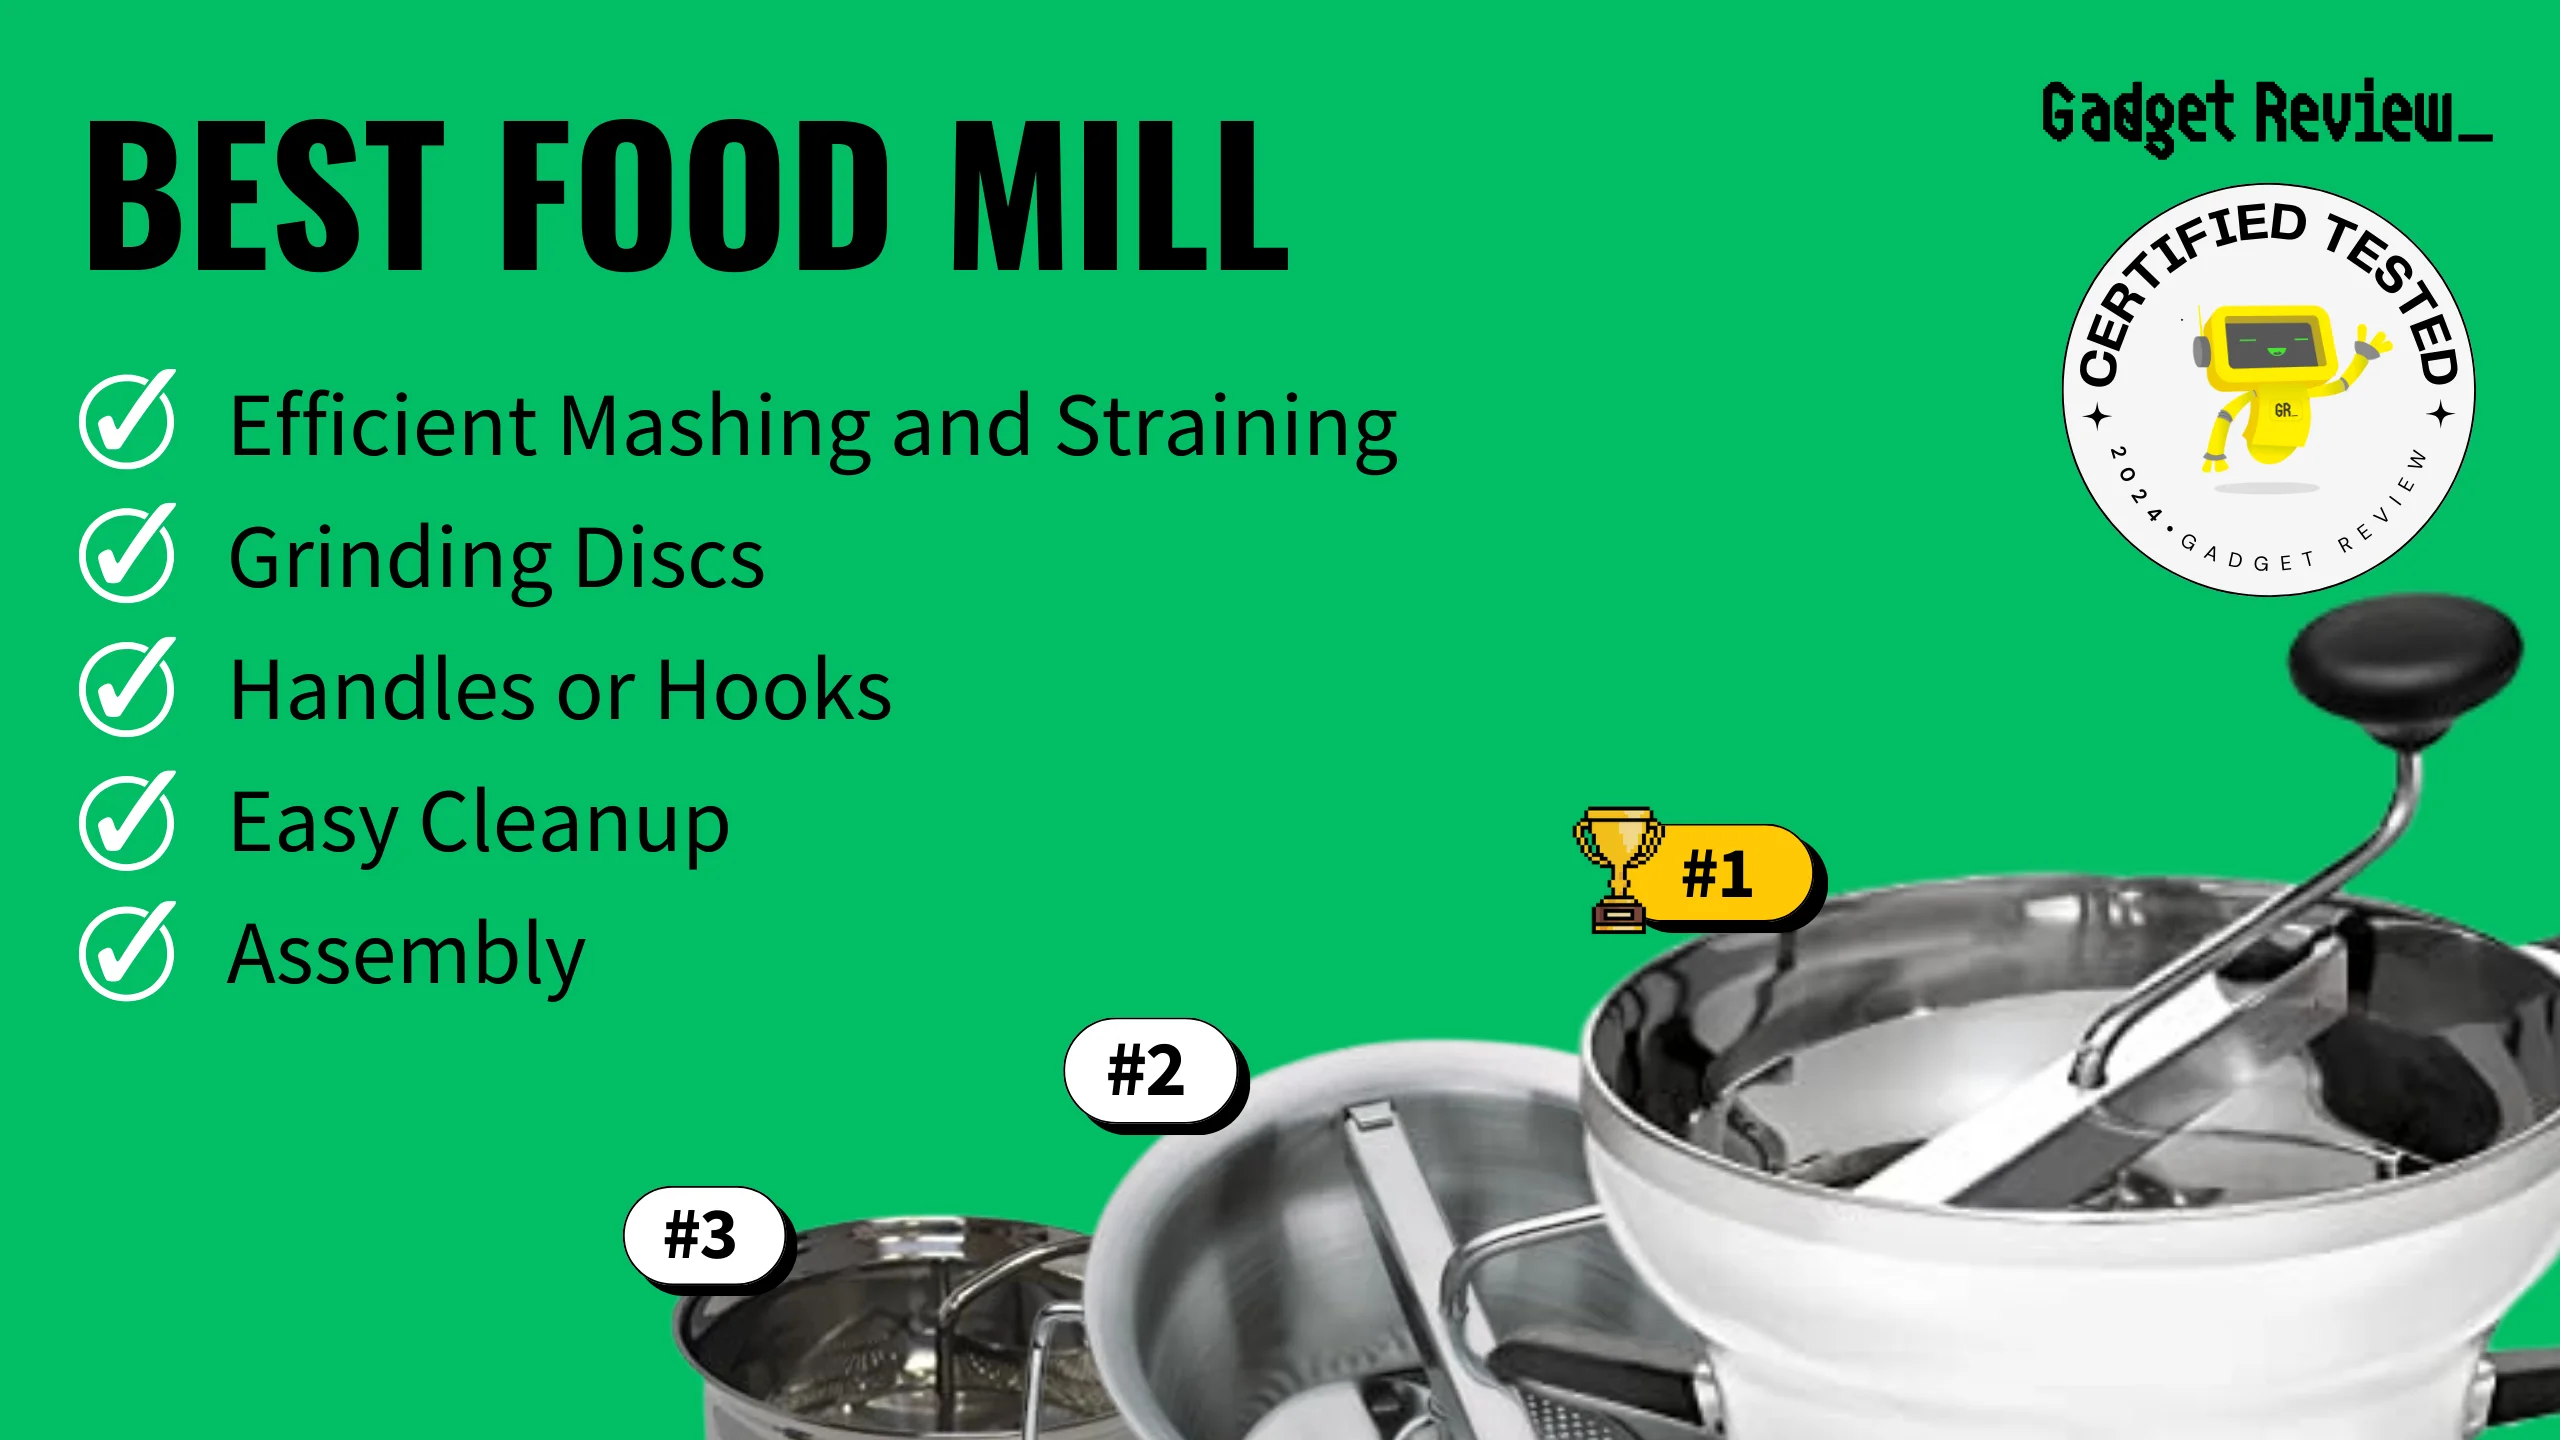 best food mill guide that shows the top best kitchen product model